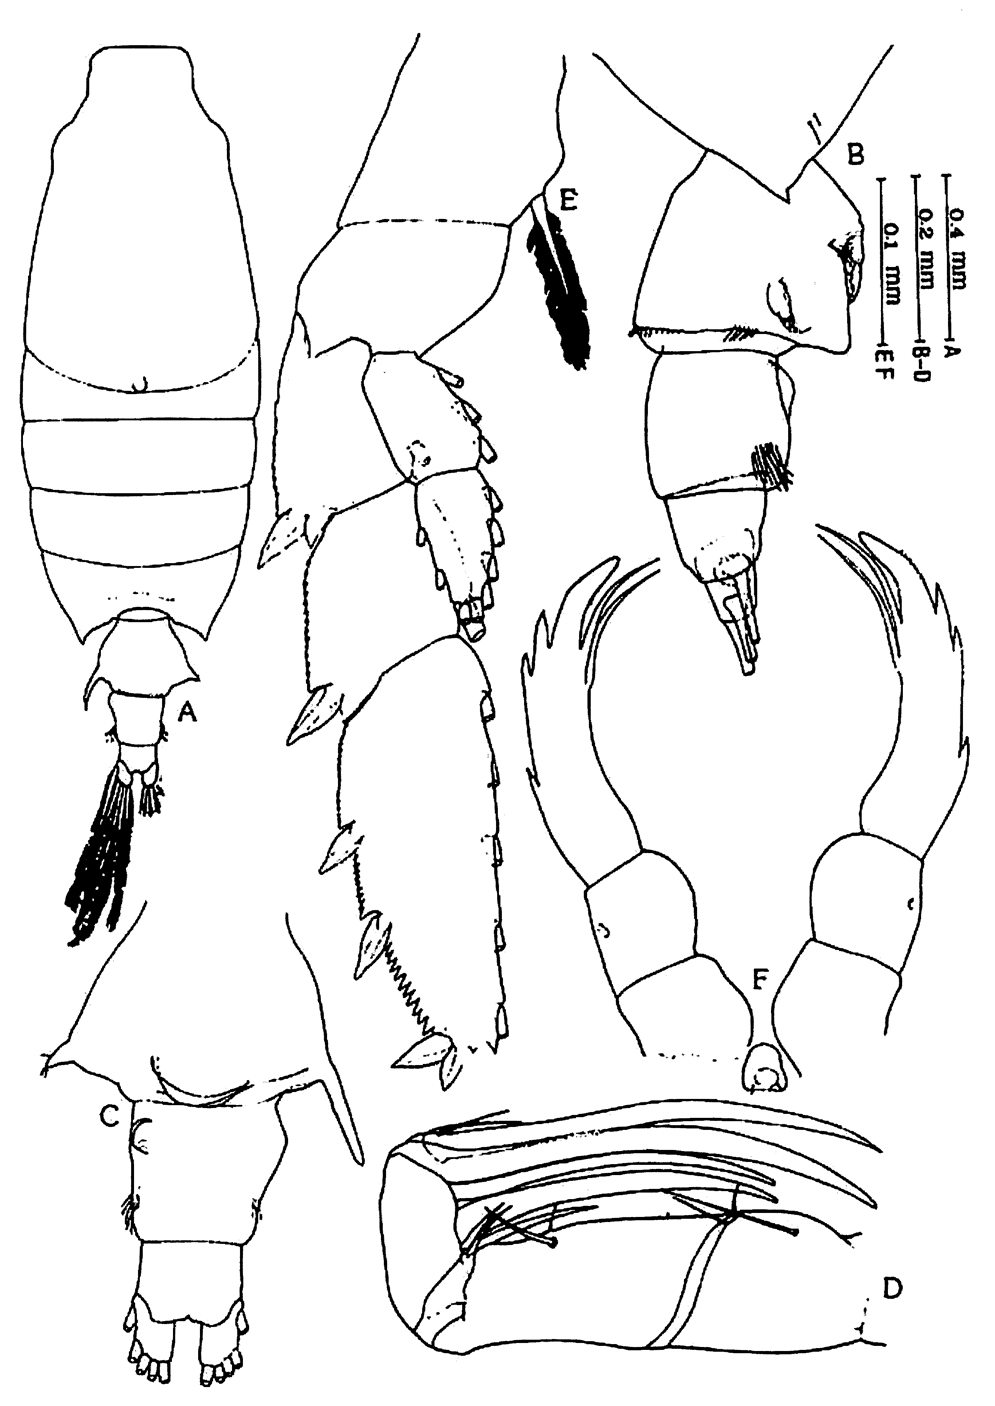 Species Candacia bispinosa - Plate 6 of morphological figures